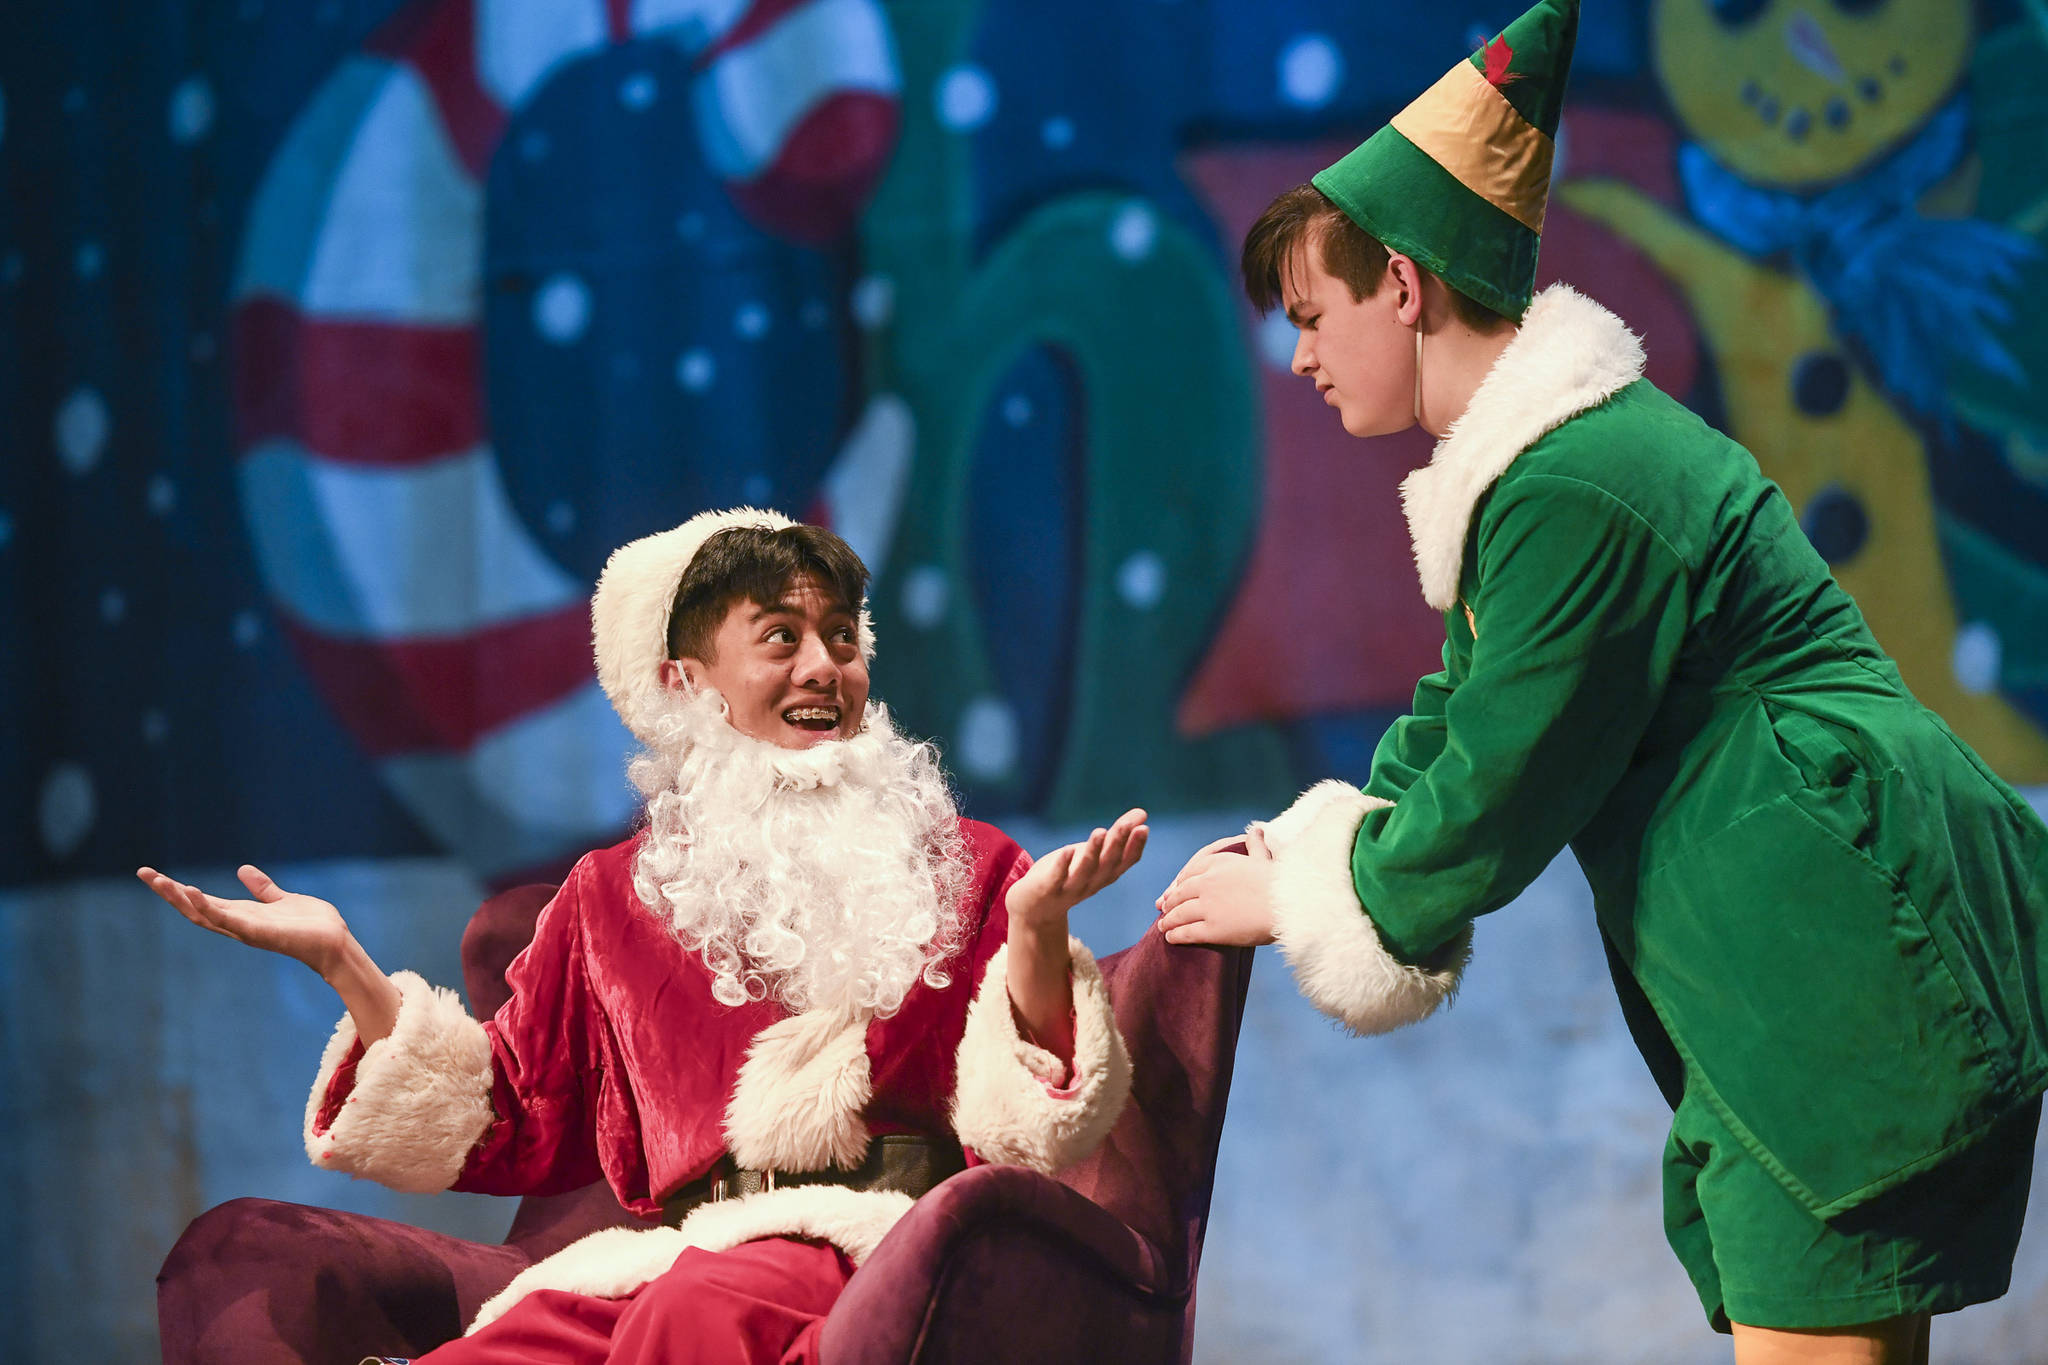 Fake Santa, played by Richard Corpuz, left, and Buddy the Elf, played by Toby Russell, rehearse in “Elf, the Musicial” at Juneau-Douglas High School: Yadaa.at Kalé on Friday, Dec. 13, 2019. (Michael Penn | Juneau Empire)